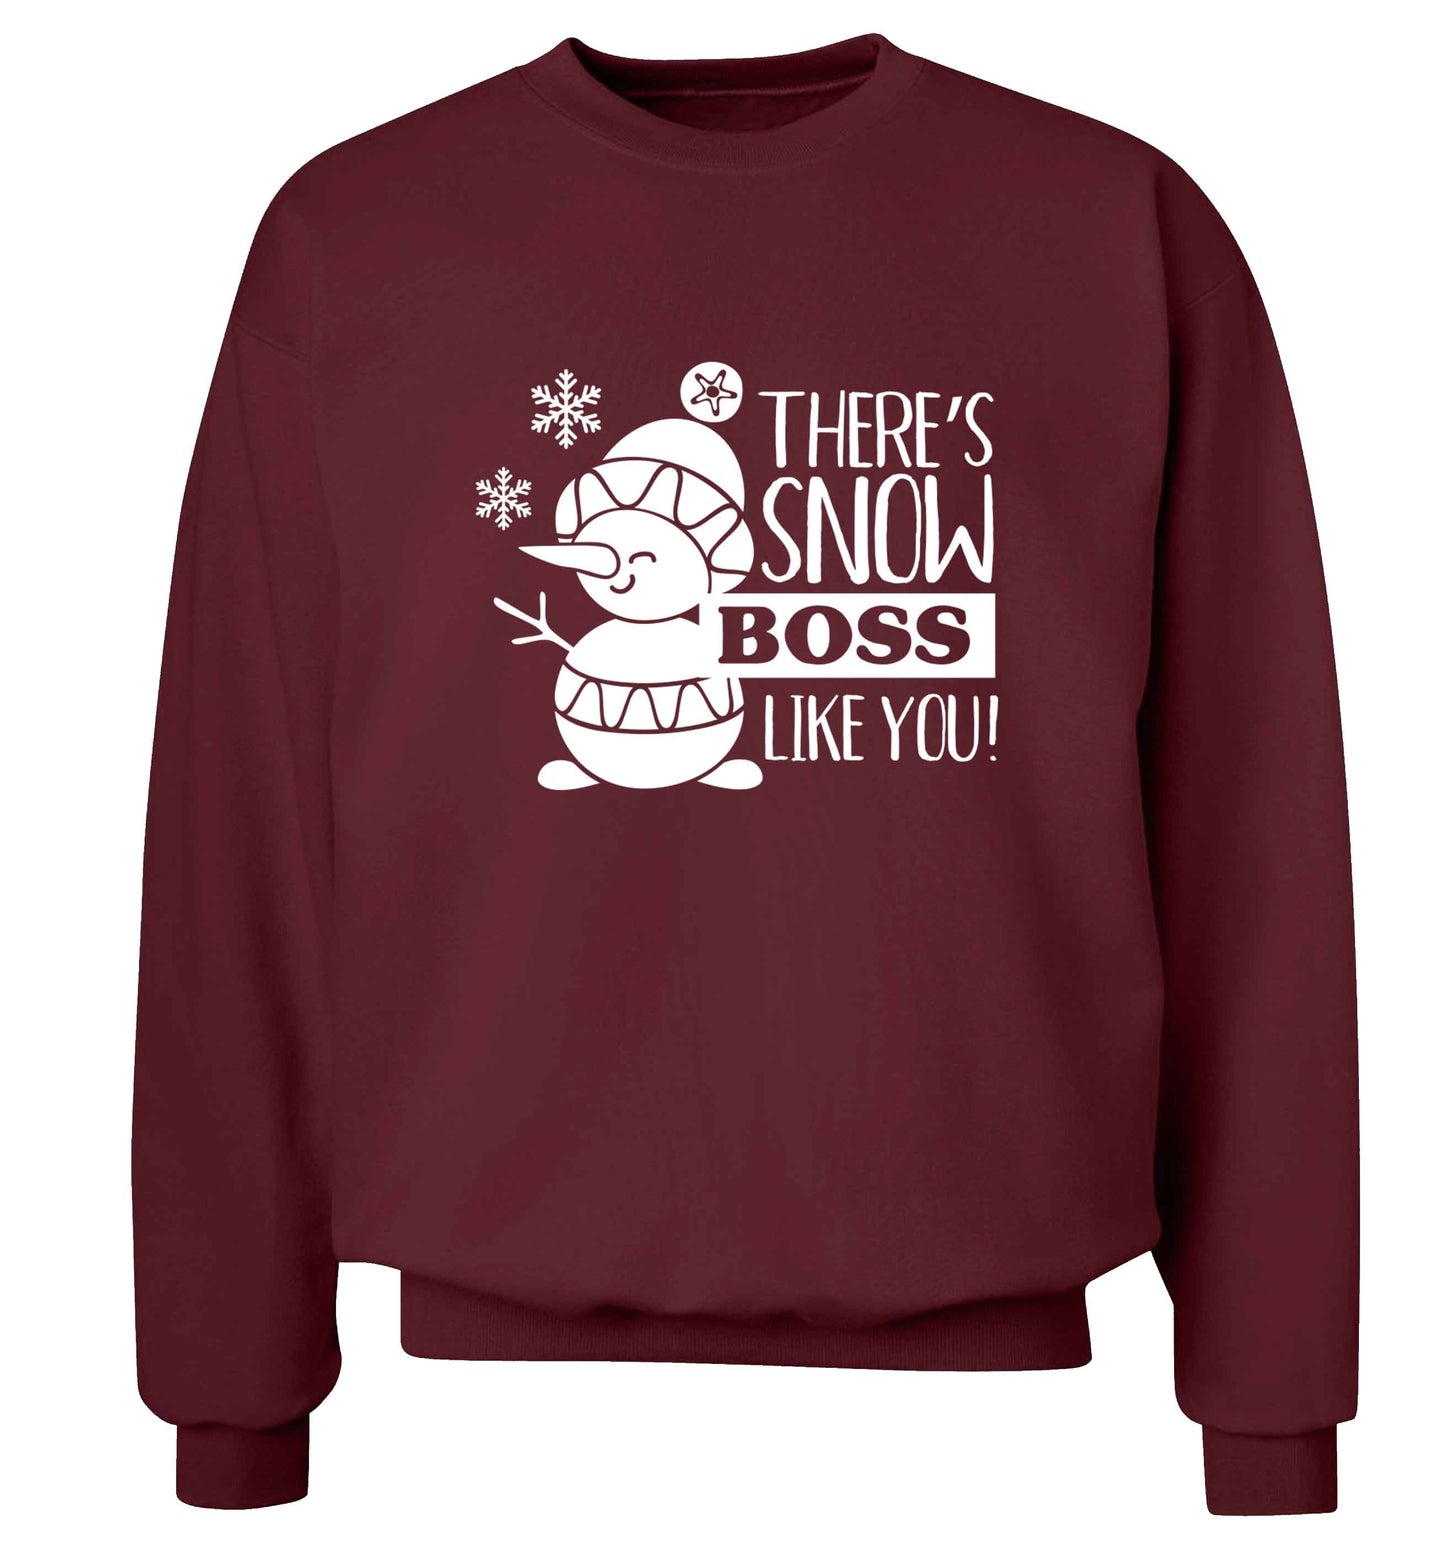 There's snow boss like you adult's unisex maroon sweater 2XL